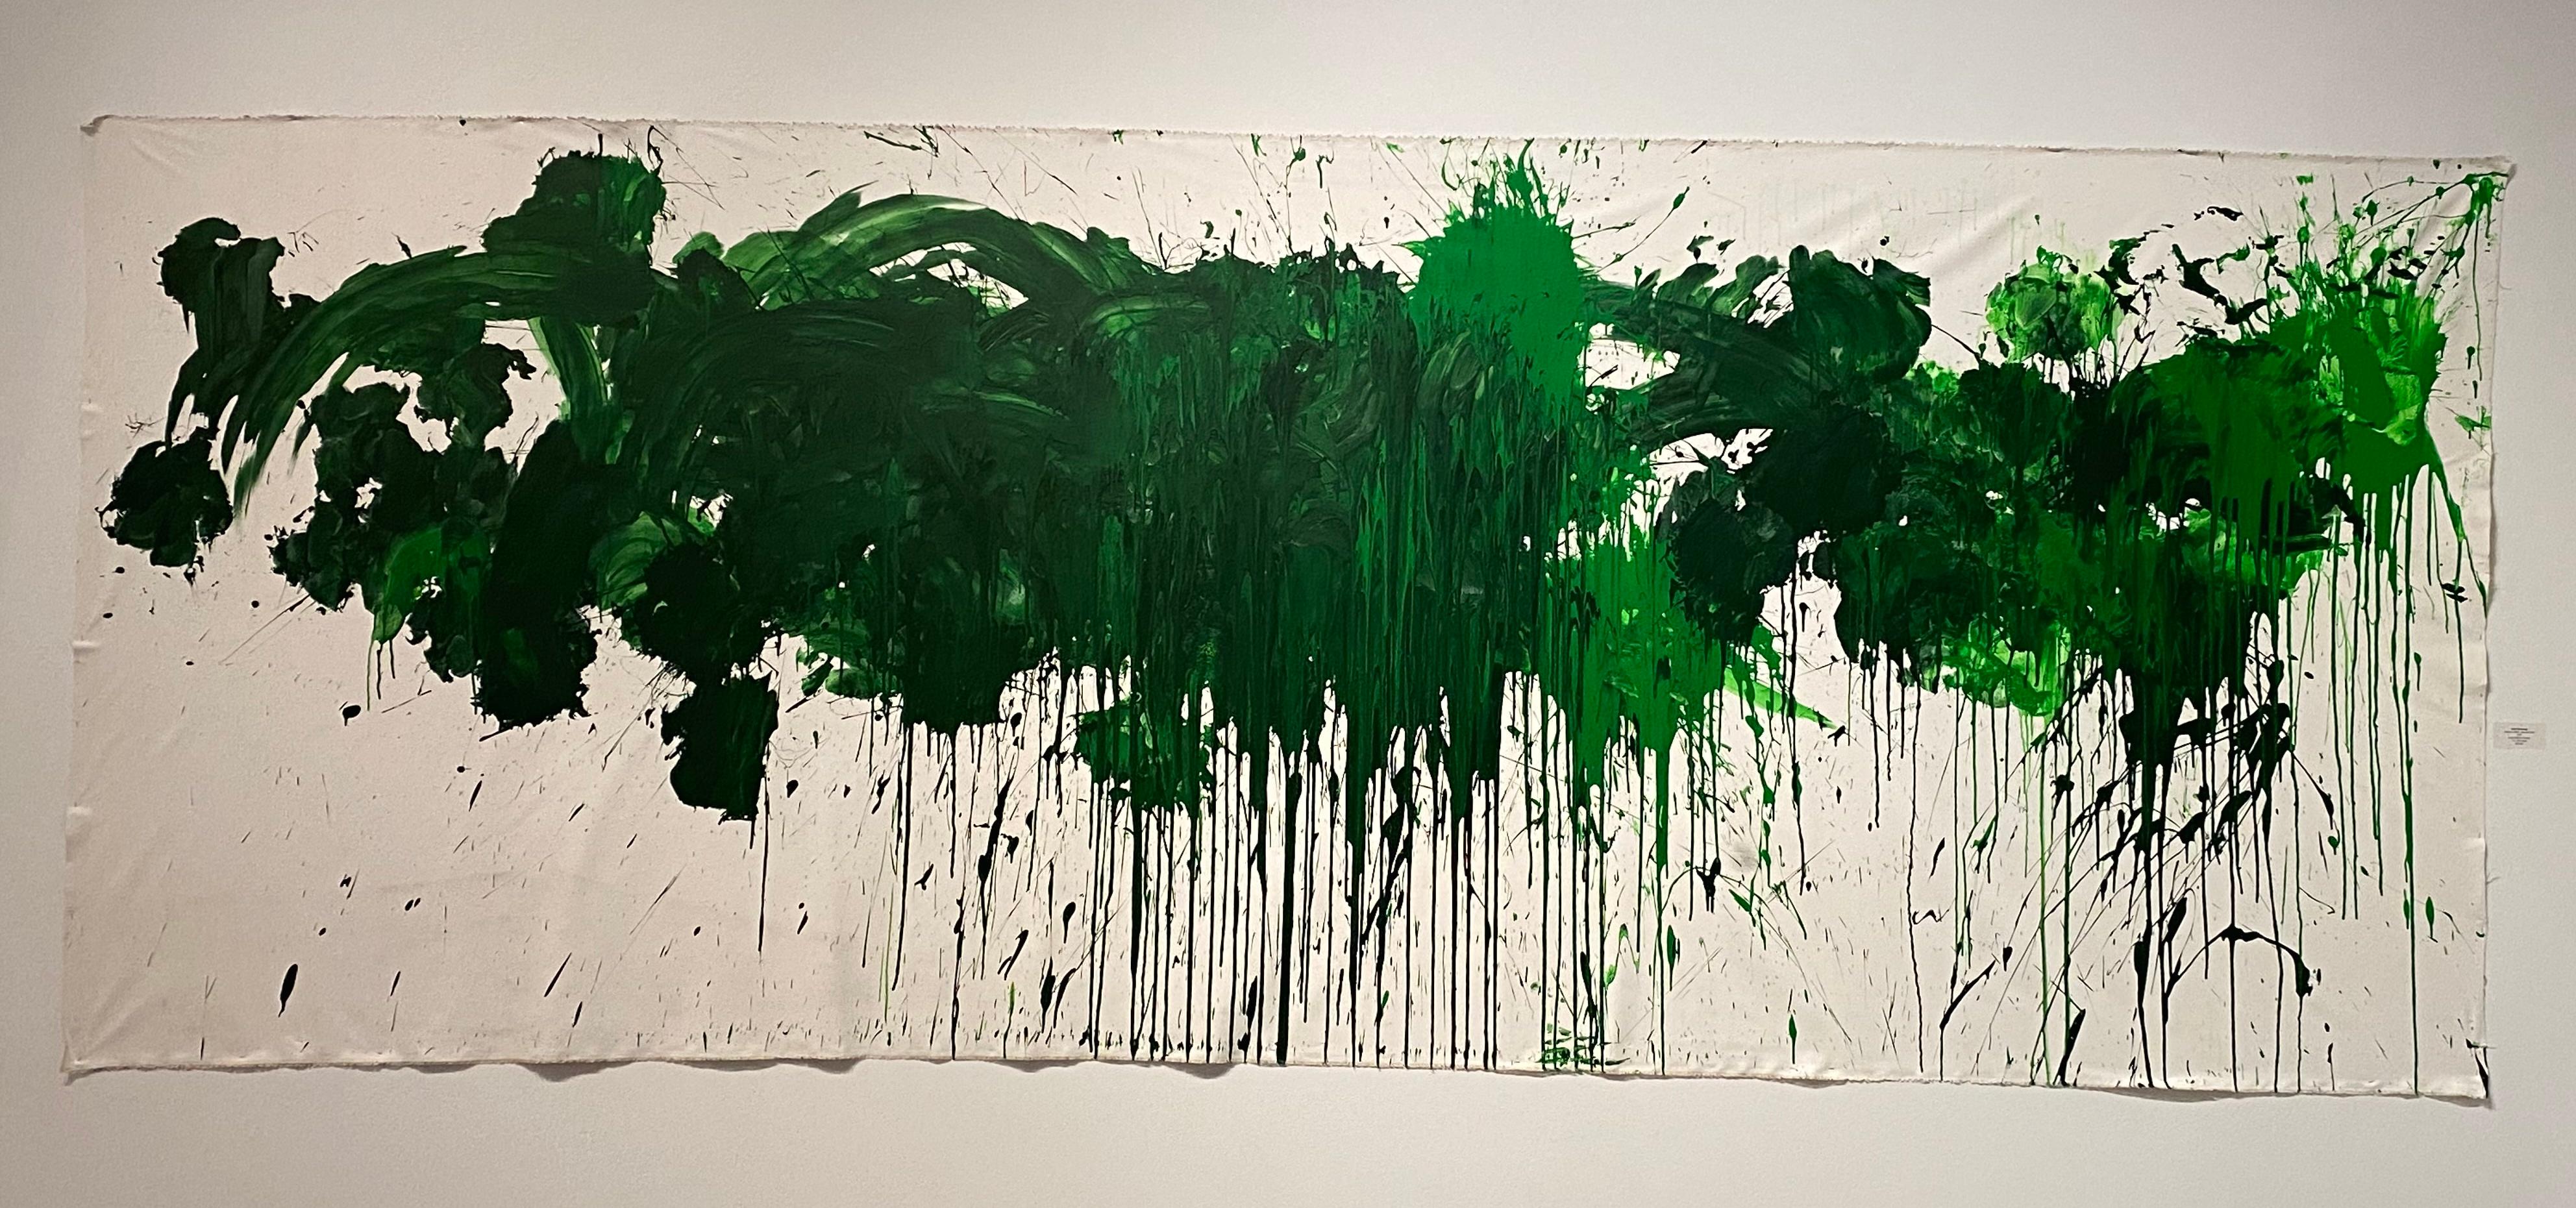 Ushio Shinohara Abstract Painting - "Green on White, " Acrylic on Canvas - Abstract Boxing painting